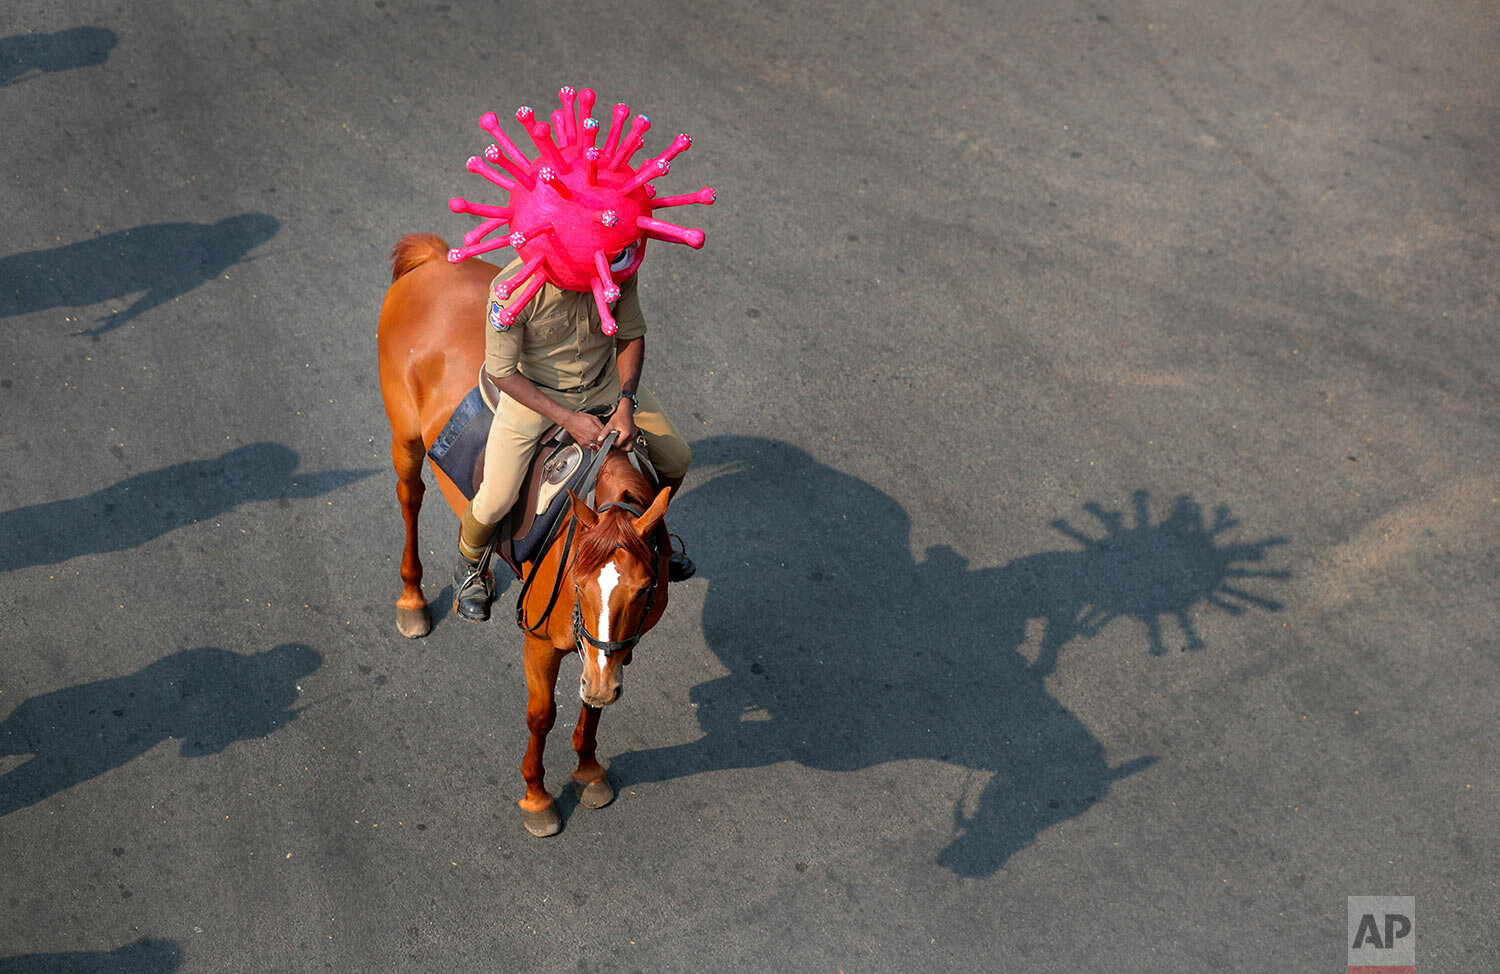  An Indian policeman wearing a virus themed helmet rides on a horse during an awareness rally aimed at preventing the spread of new coronavirus in Hyderabad, India, Thursday, April 2, 2020.  (AP Photo/Mahesh Kumar A.) 